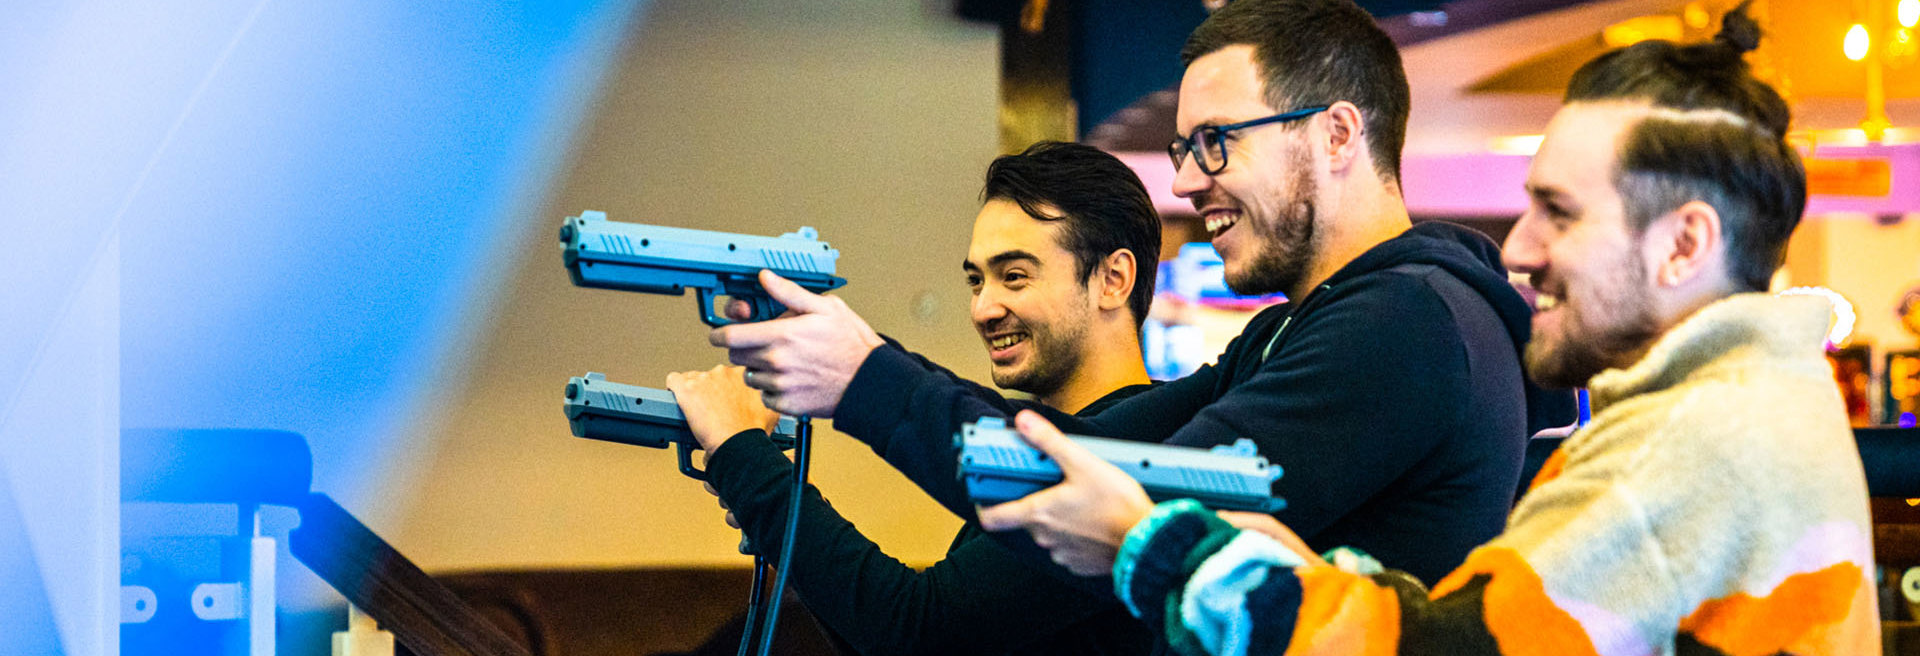 Group of men laughing and playing shooting amusement arcade at namco funscape